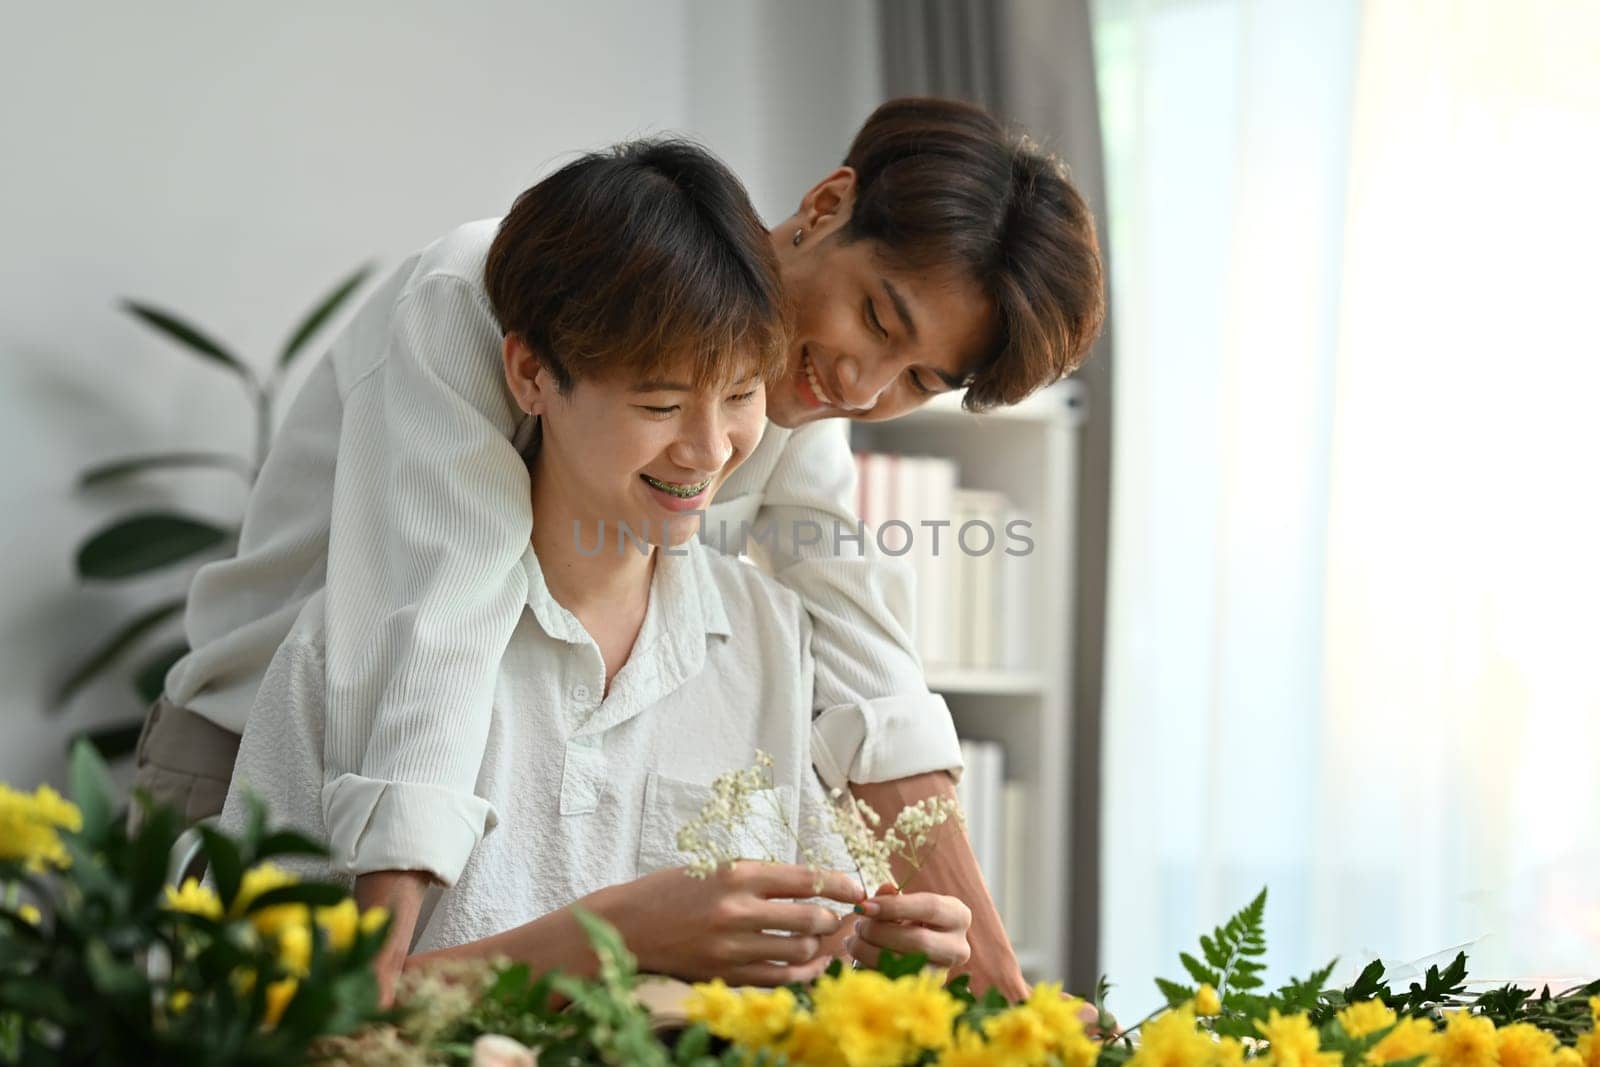 Homosexual, LGBT and relationships. Joyful male gay couple spending time together, enjoying arranging flowers in cozy home.